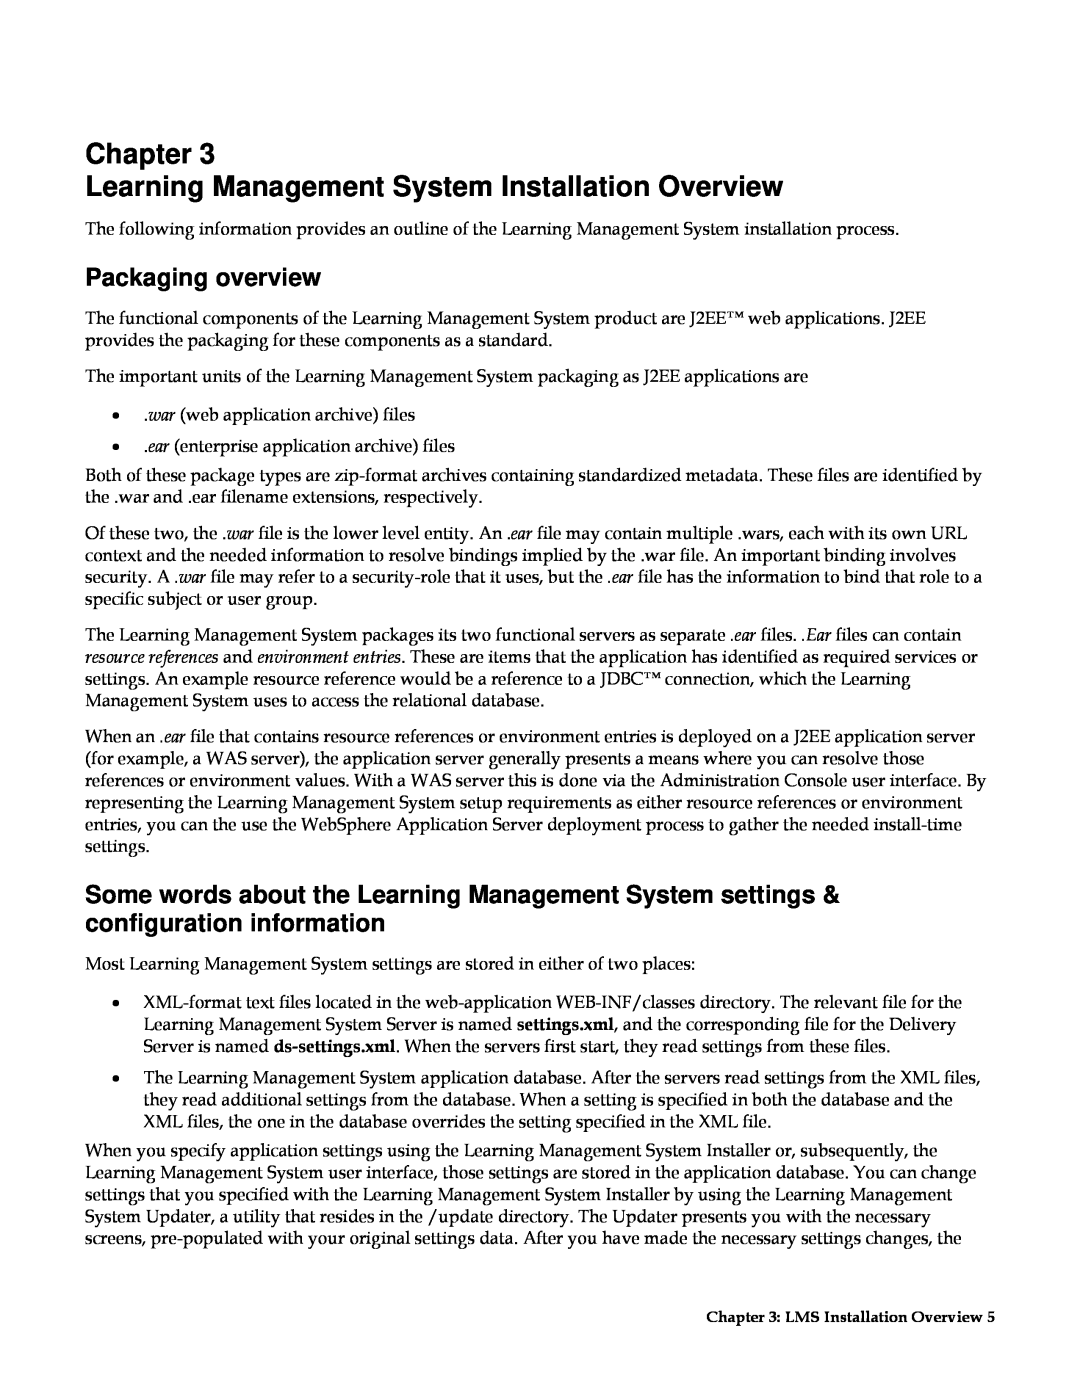 IBM G210-1784-00 manual Chapter Learning Management System Installation Overview, Packaging overview 